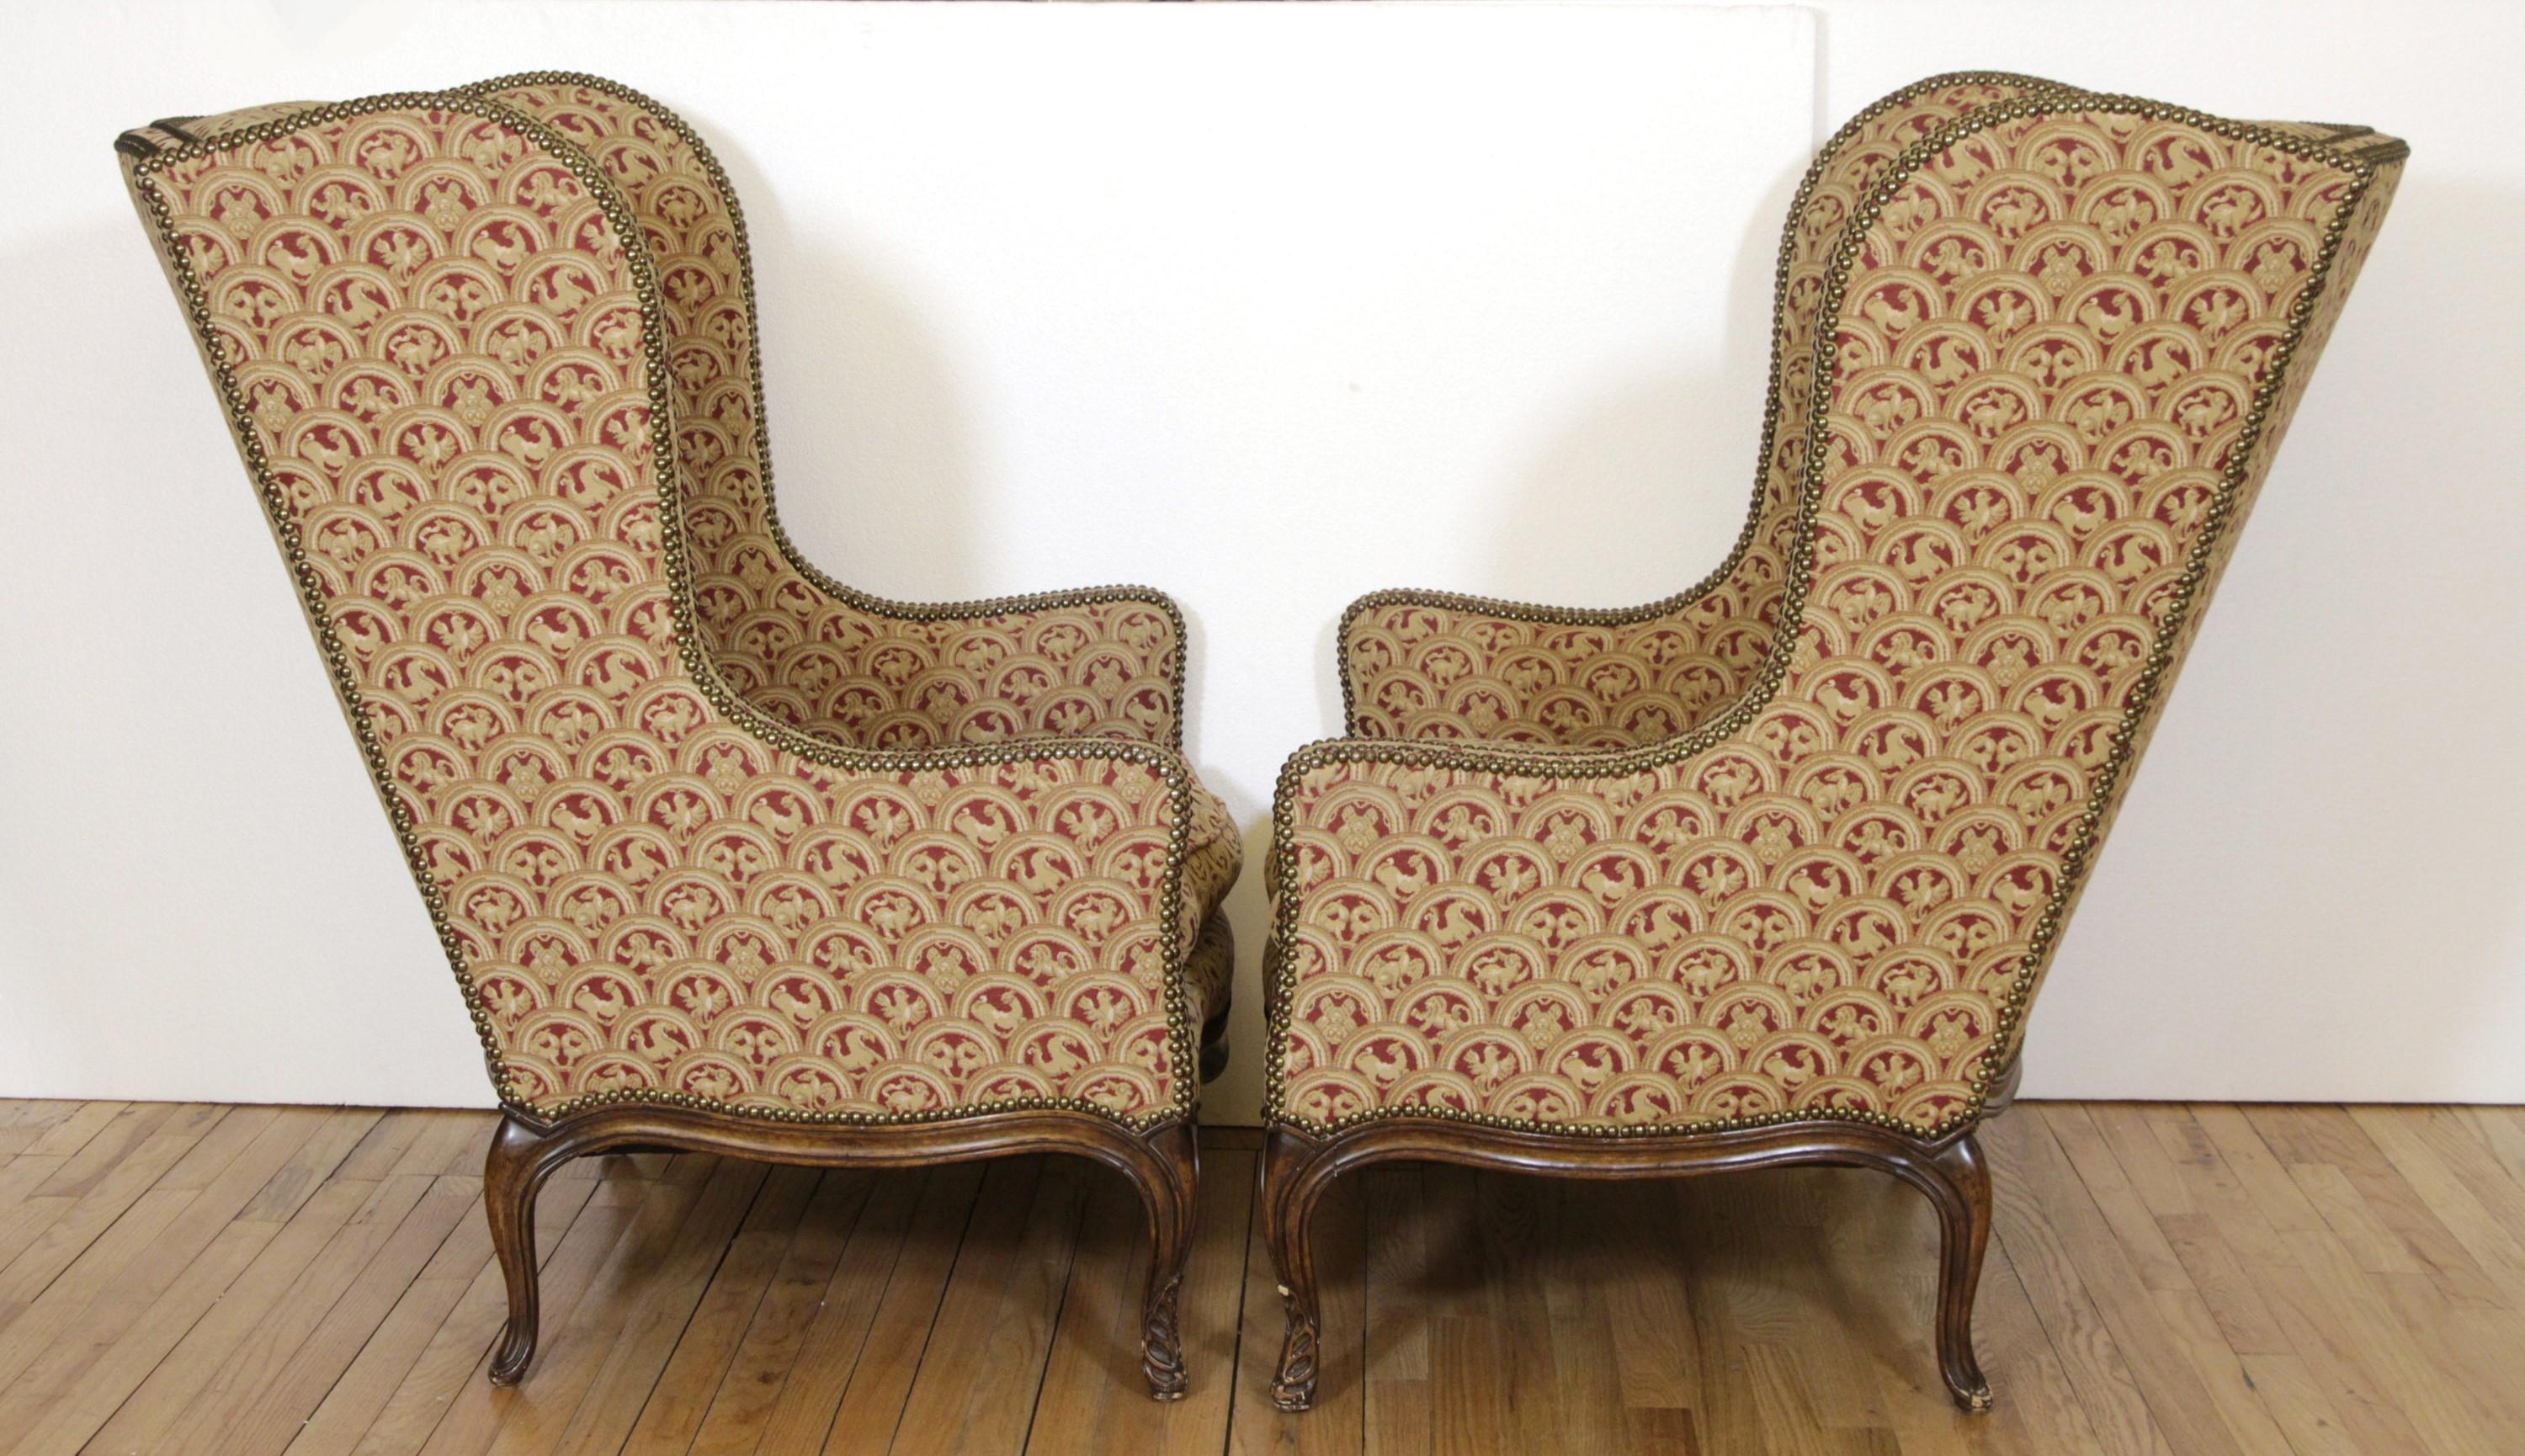 American Pair of Upholstered Tan Wing Back Chairs w/ Ornate Figural Details